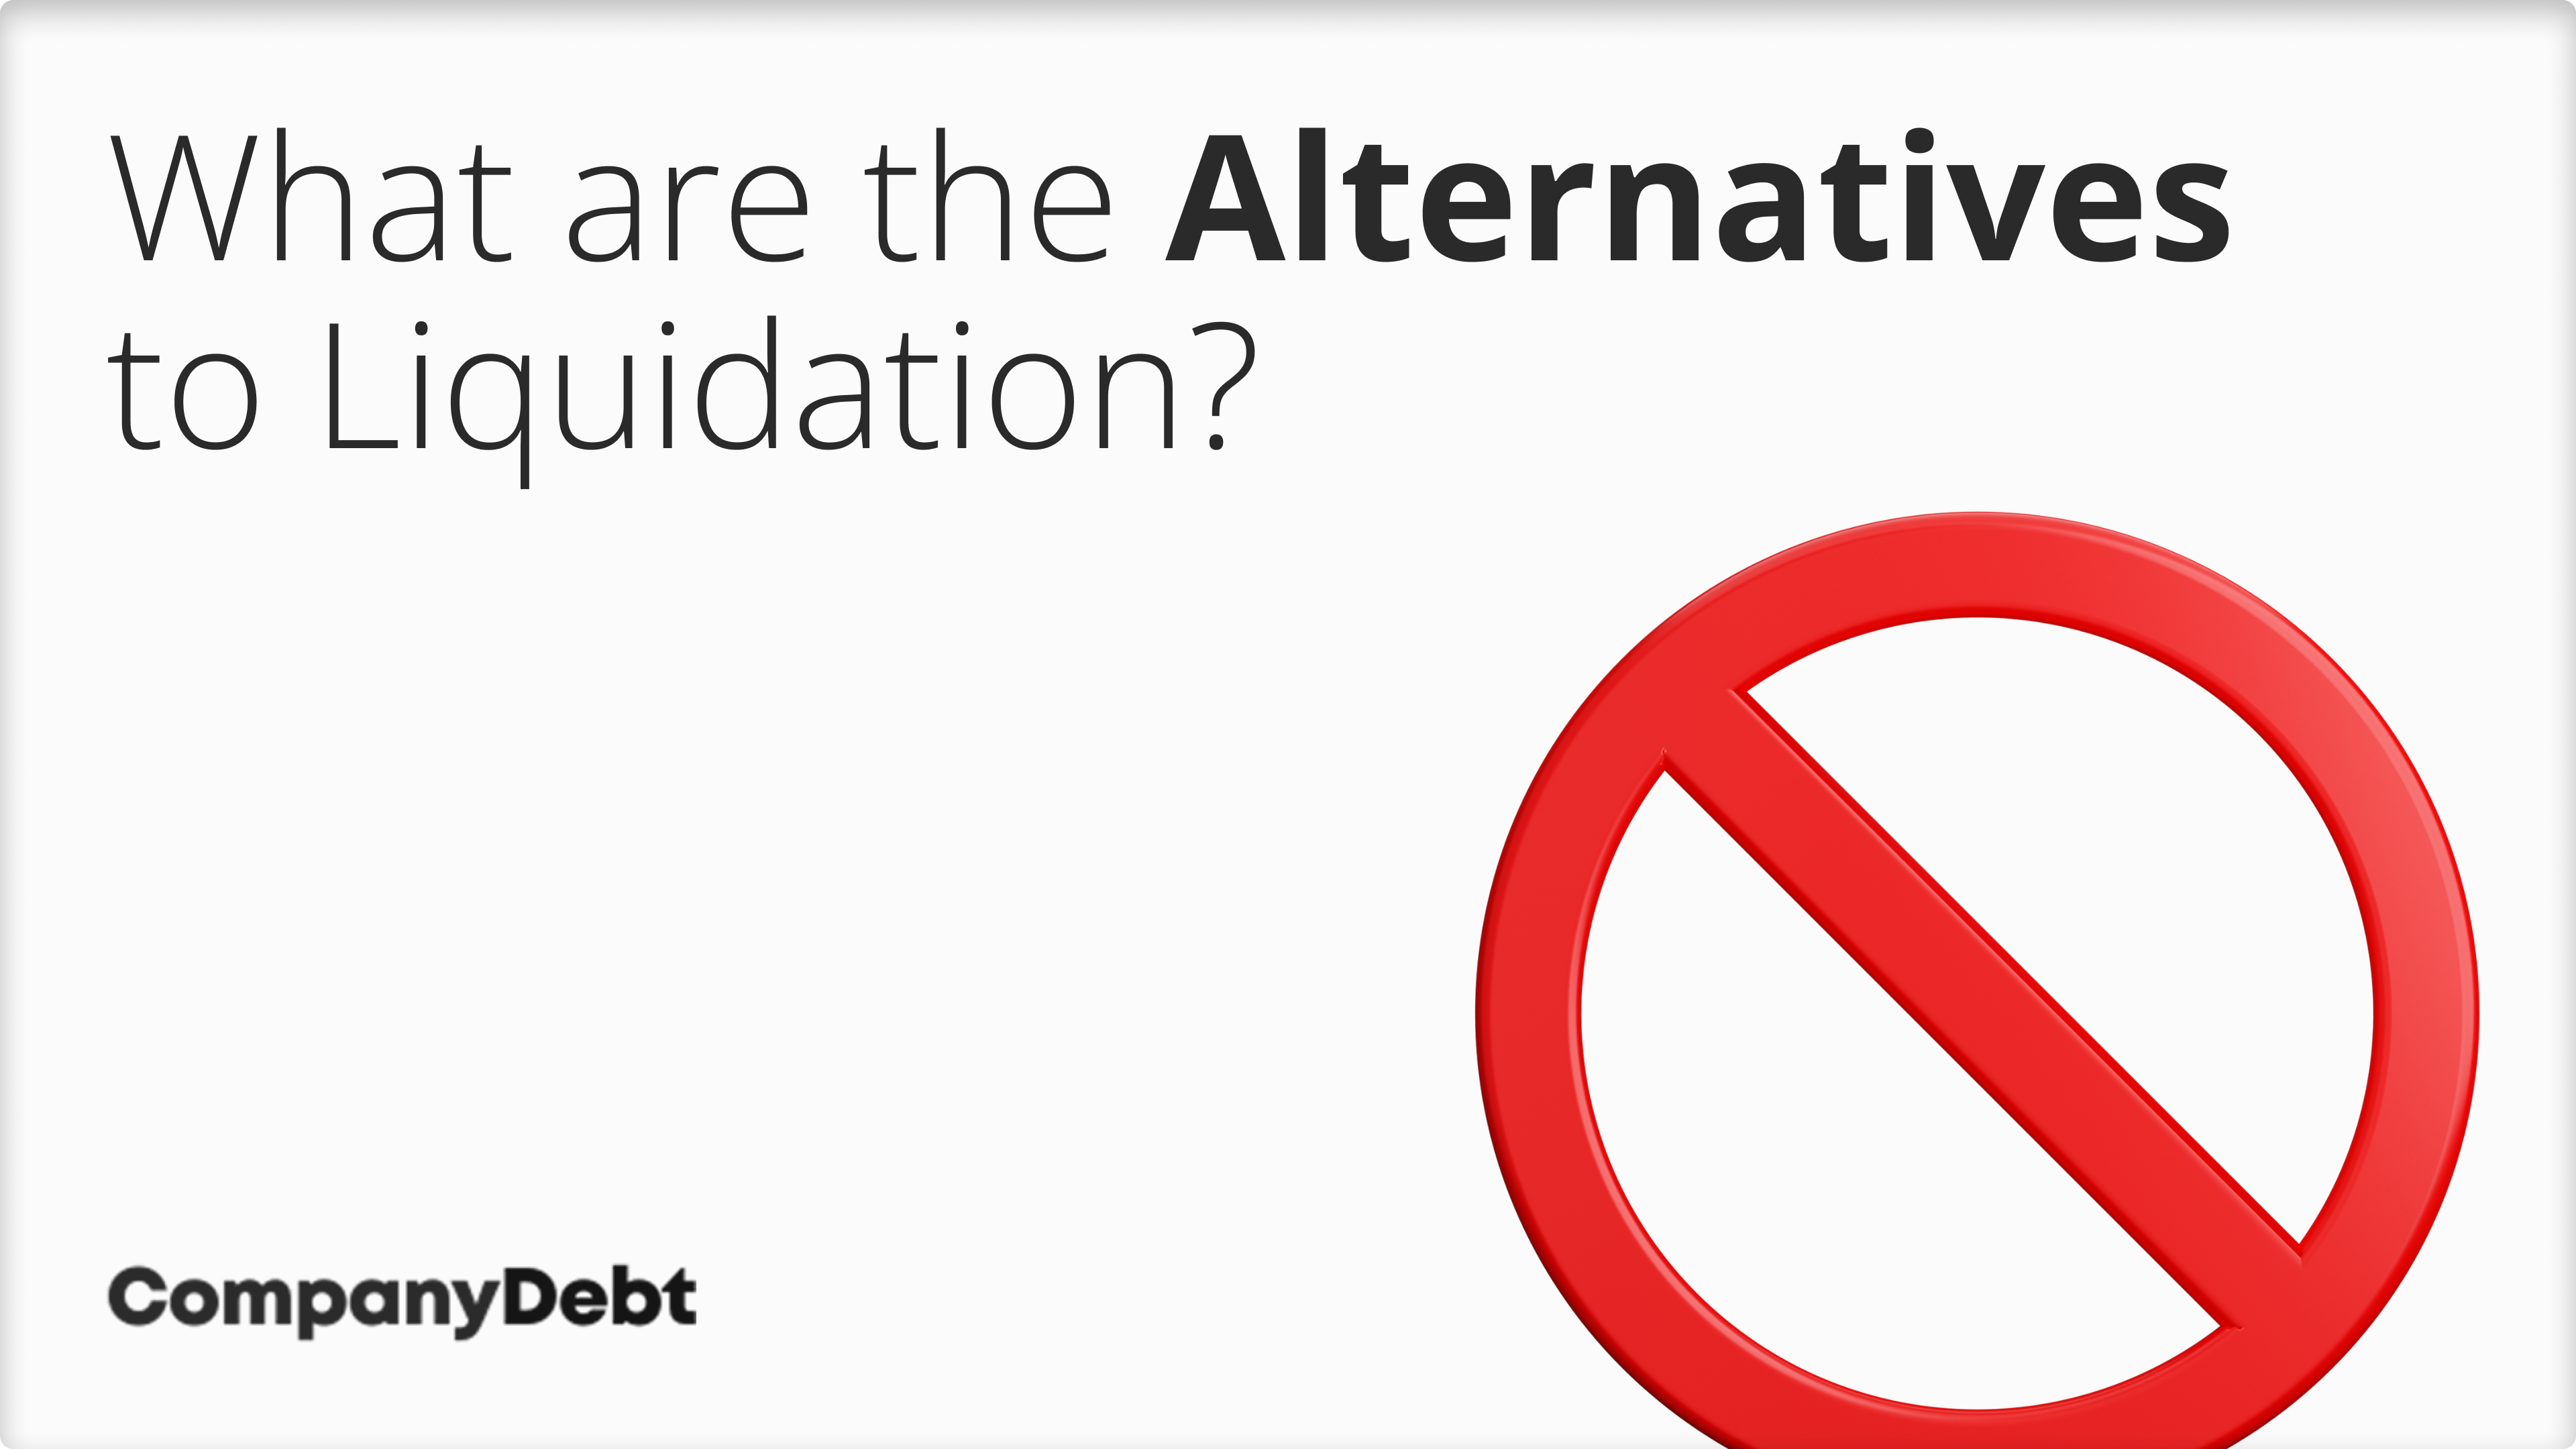 What are the Alternatives to Liquidation?